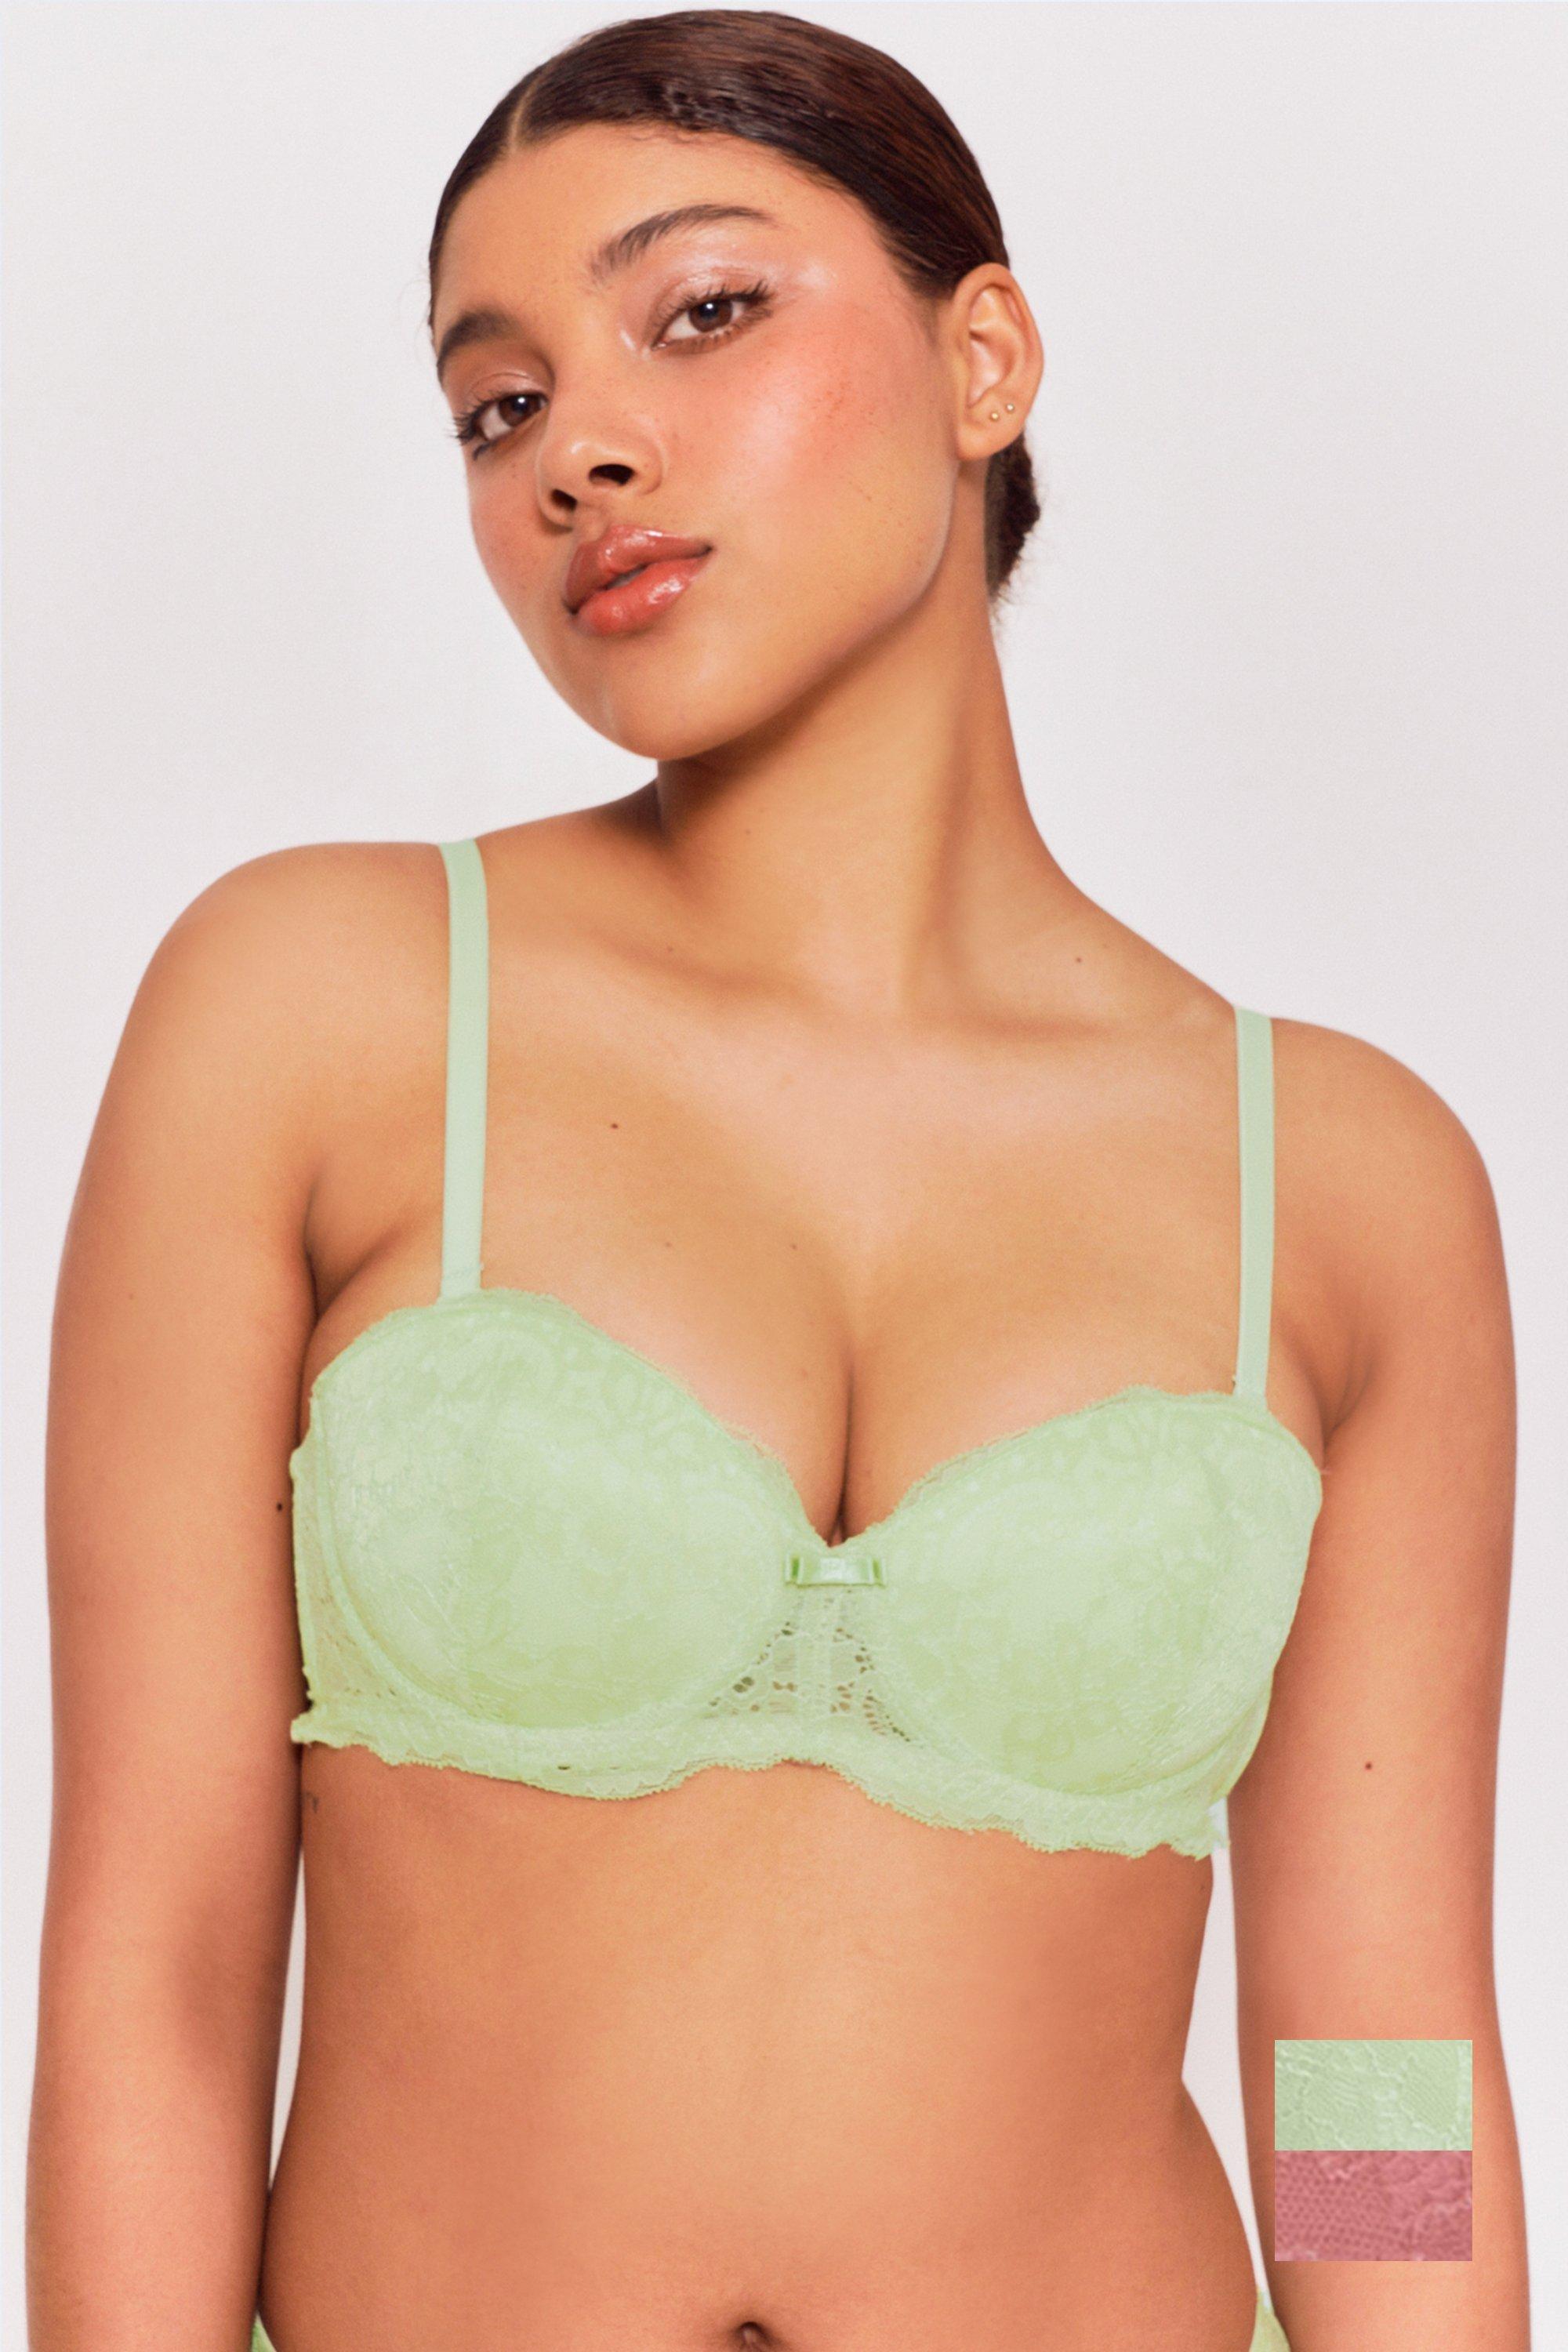 Lightgreen swimsuit from two pieces with balconette bra push-up